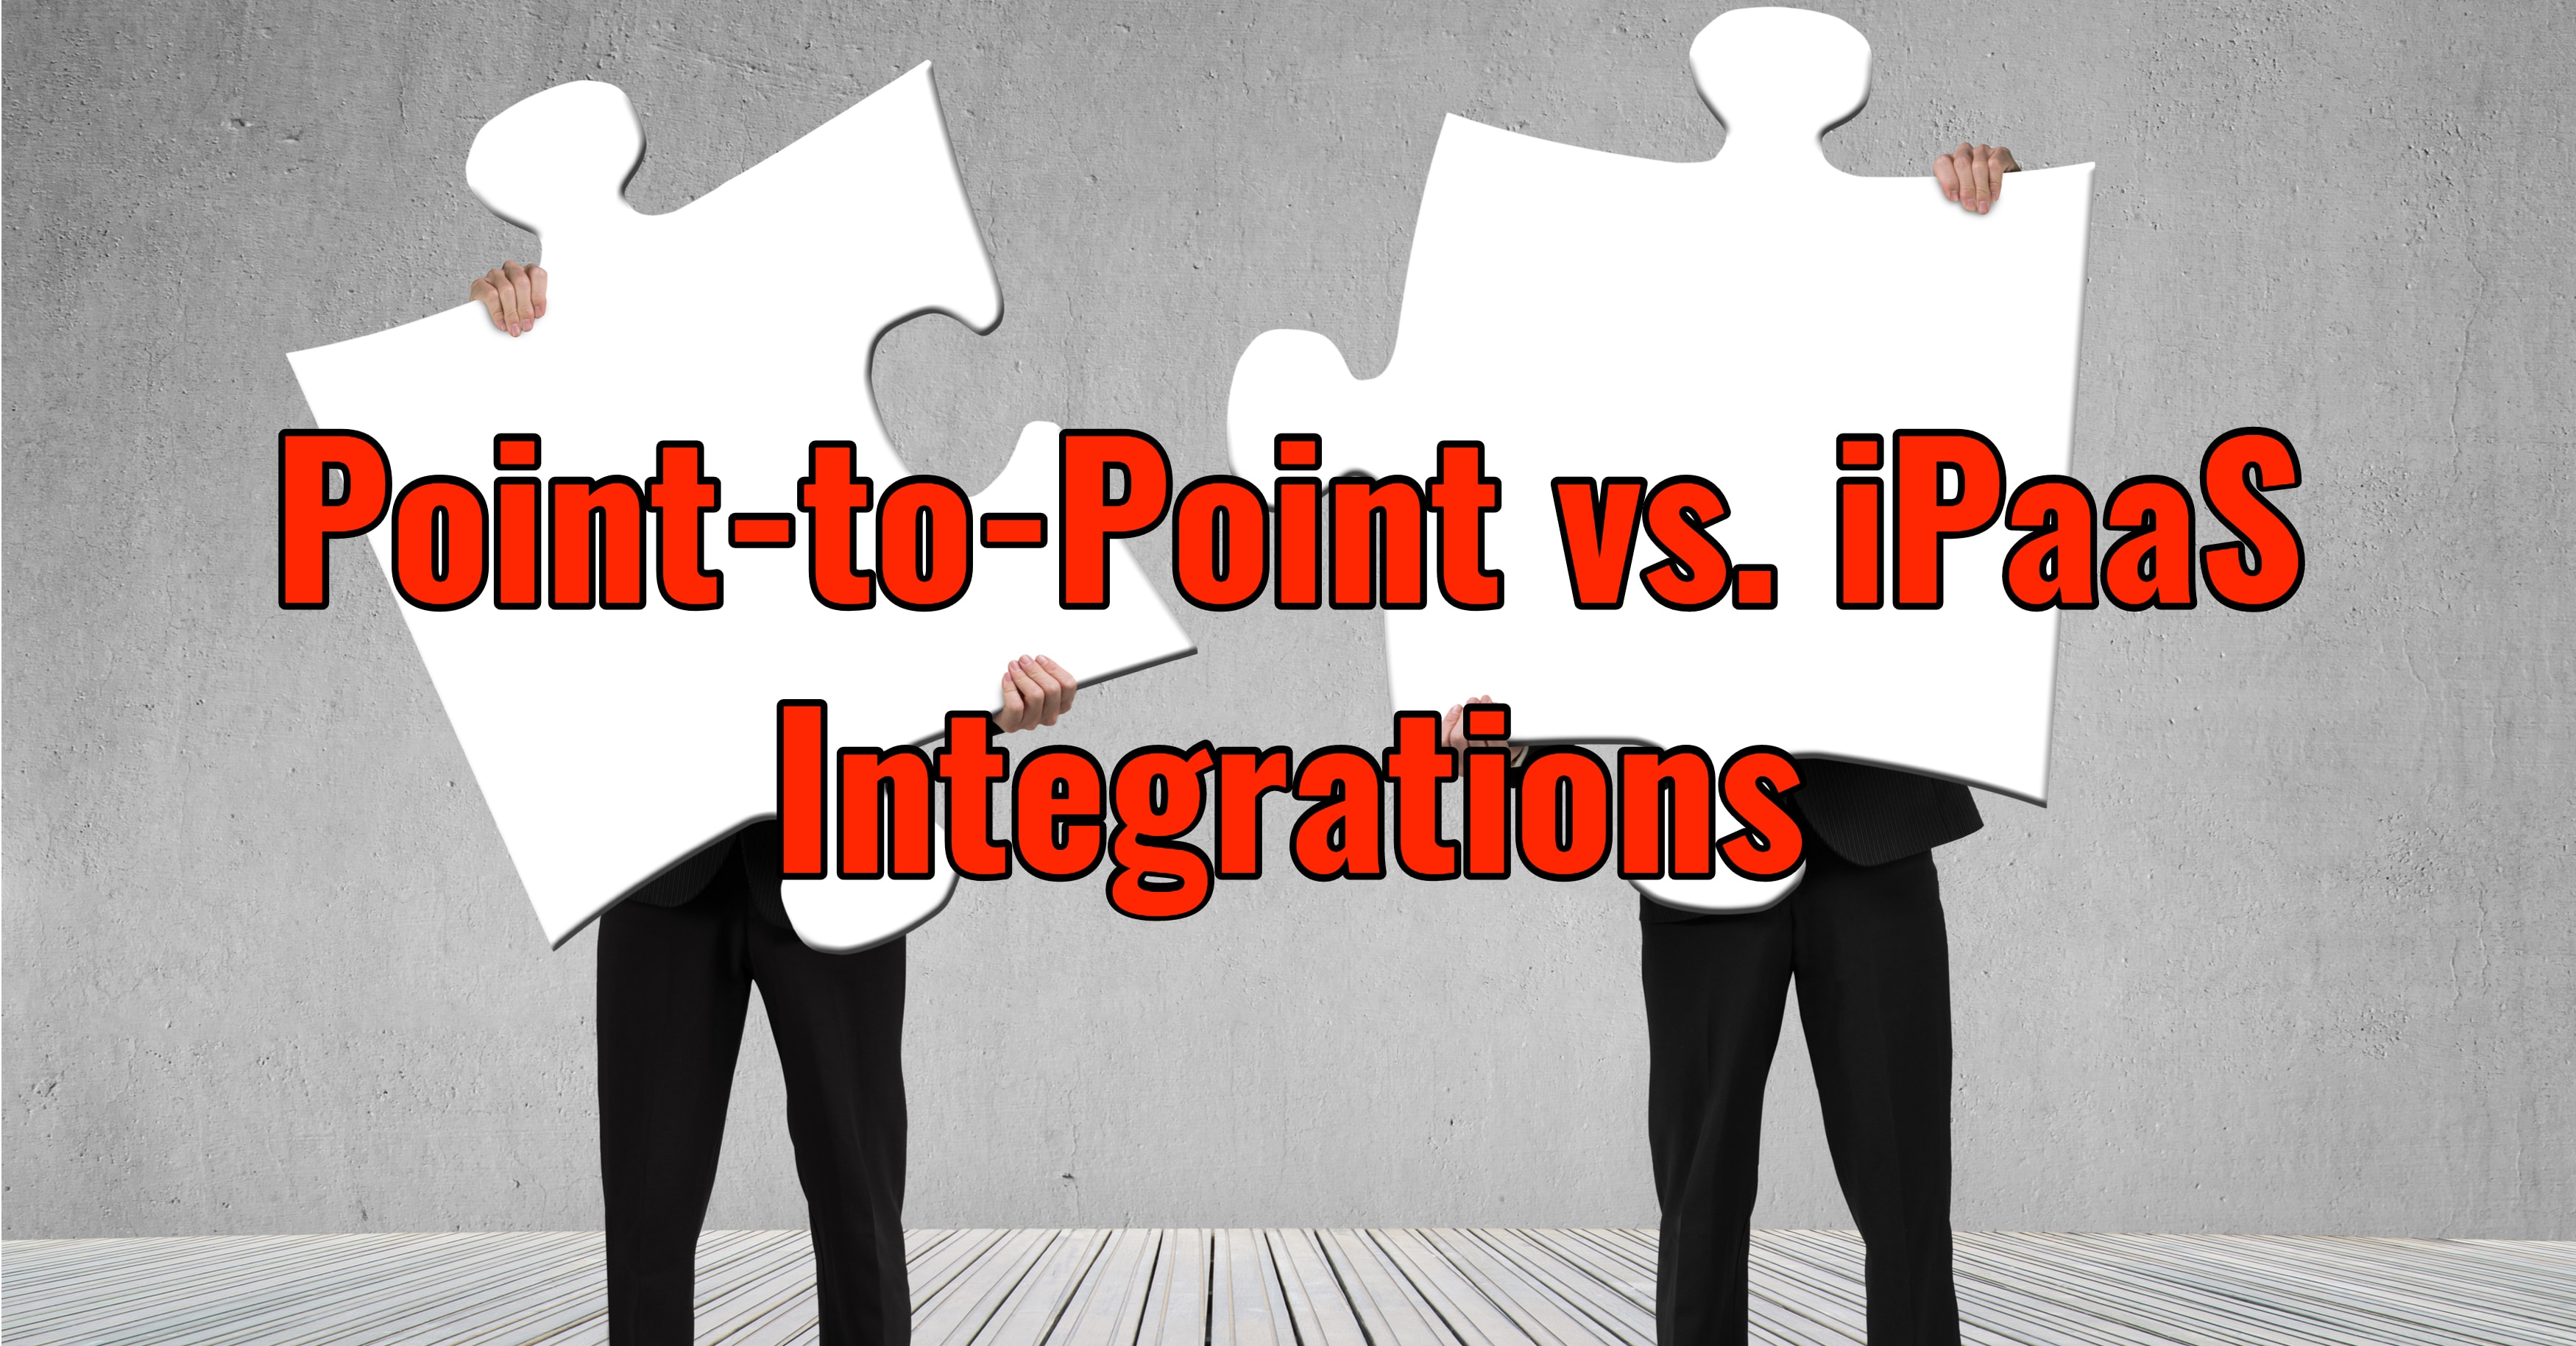 Point-to-Point vs. iPaaS